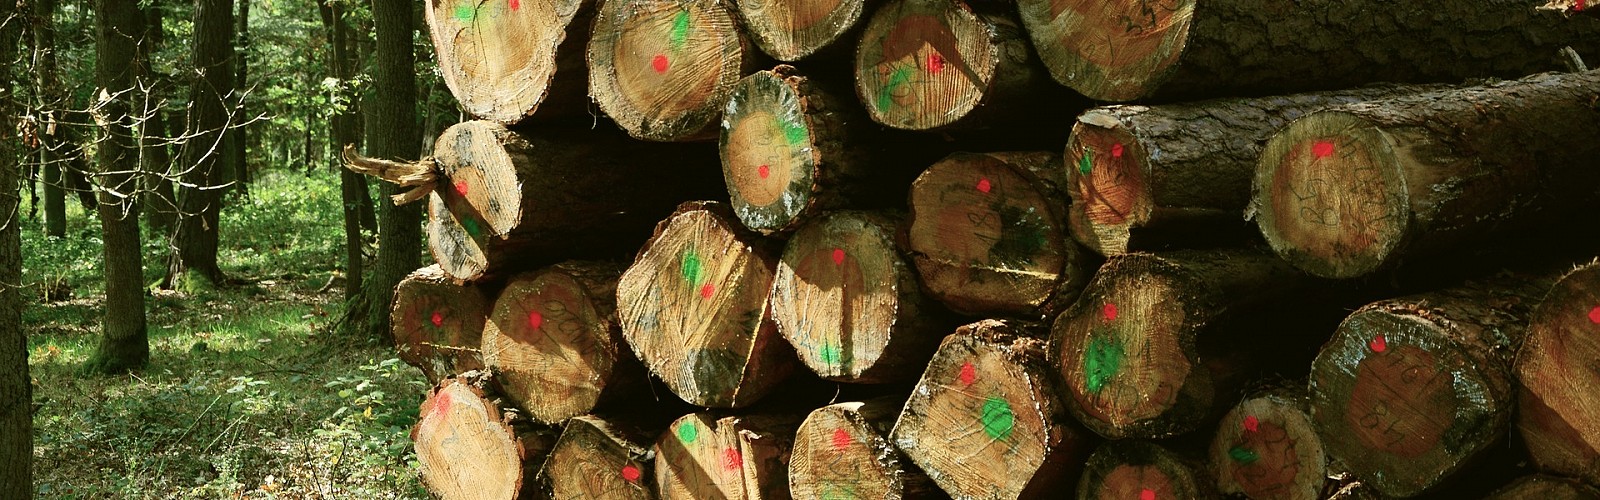 pile of cut wood with spray marks on the cut ends (image: congerdesign / pixabay)